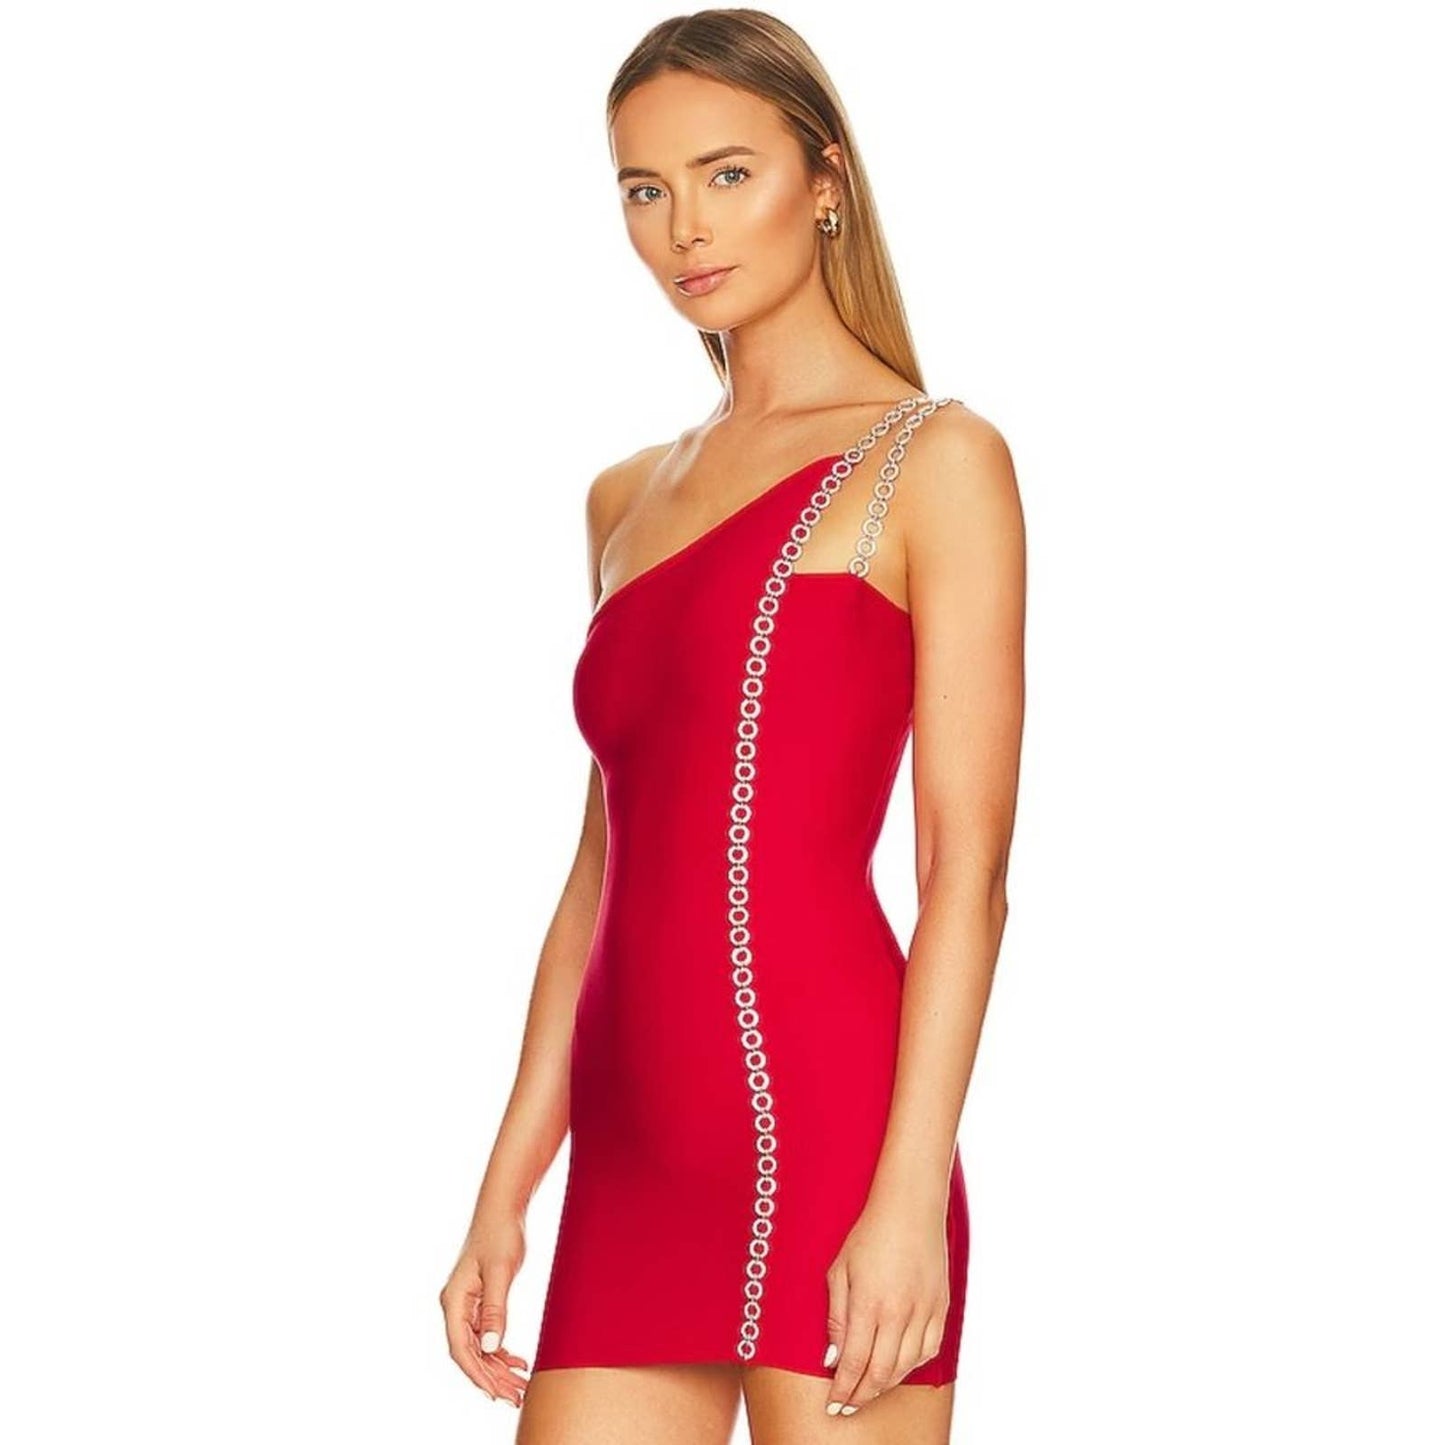 h:ours Alisha One Shoulder Dress in Red NWT Size Small